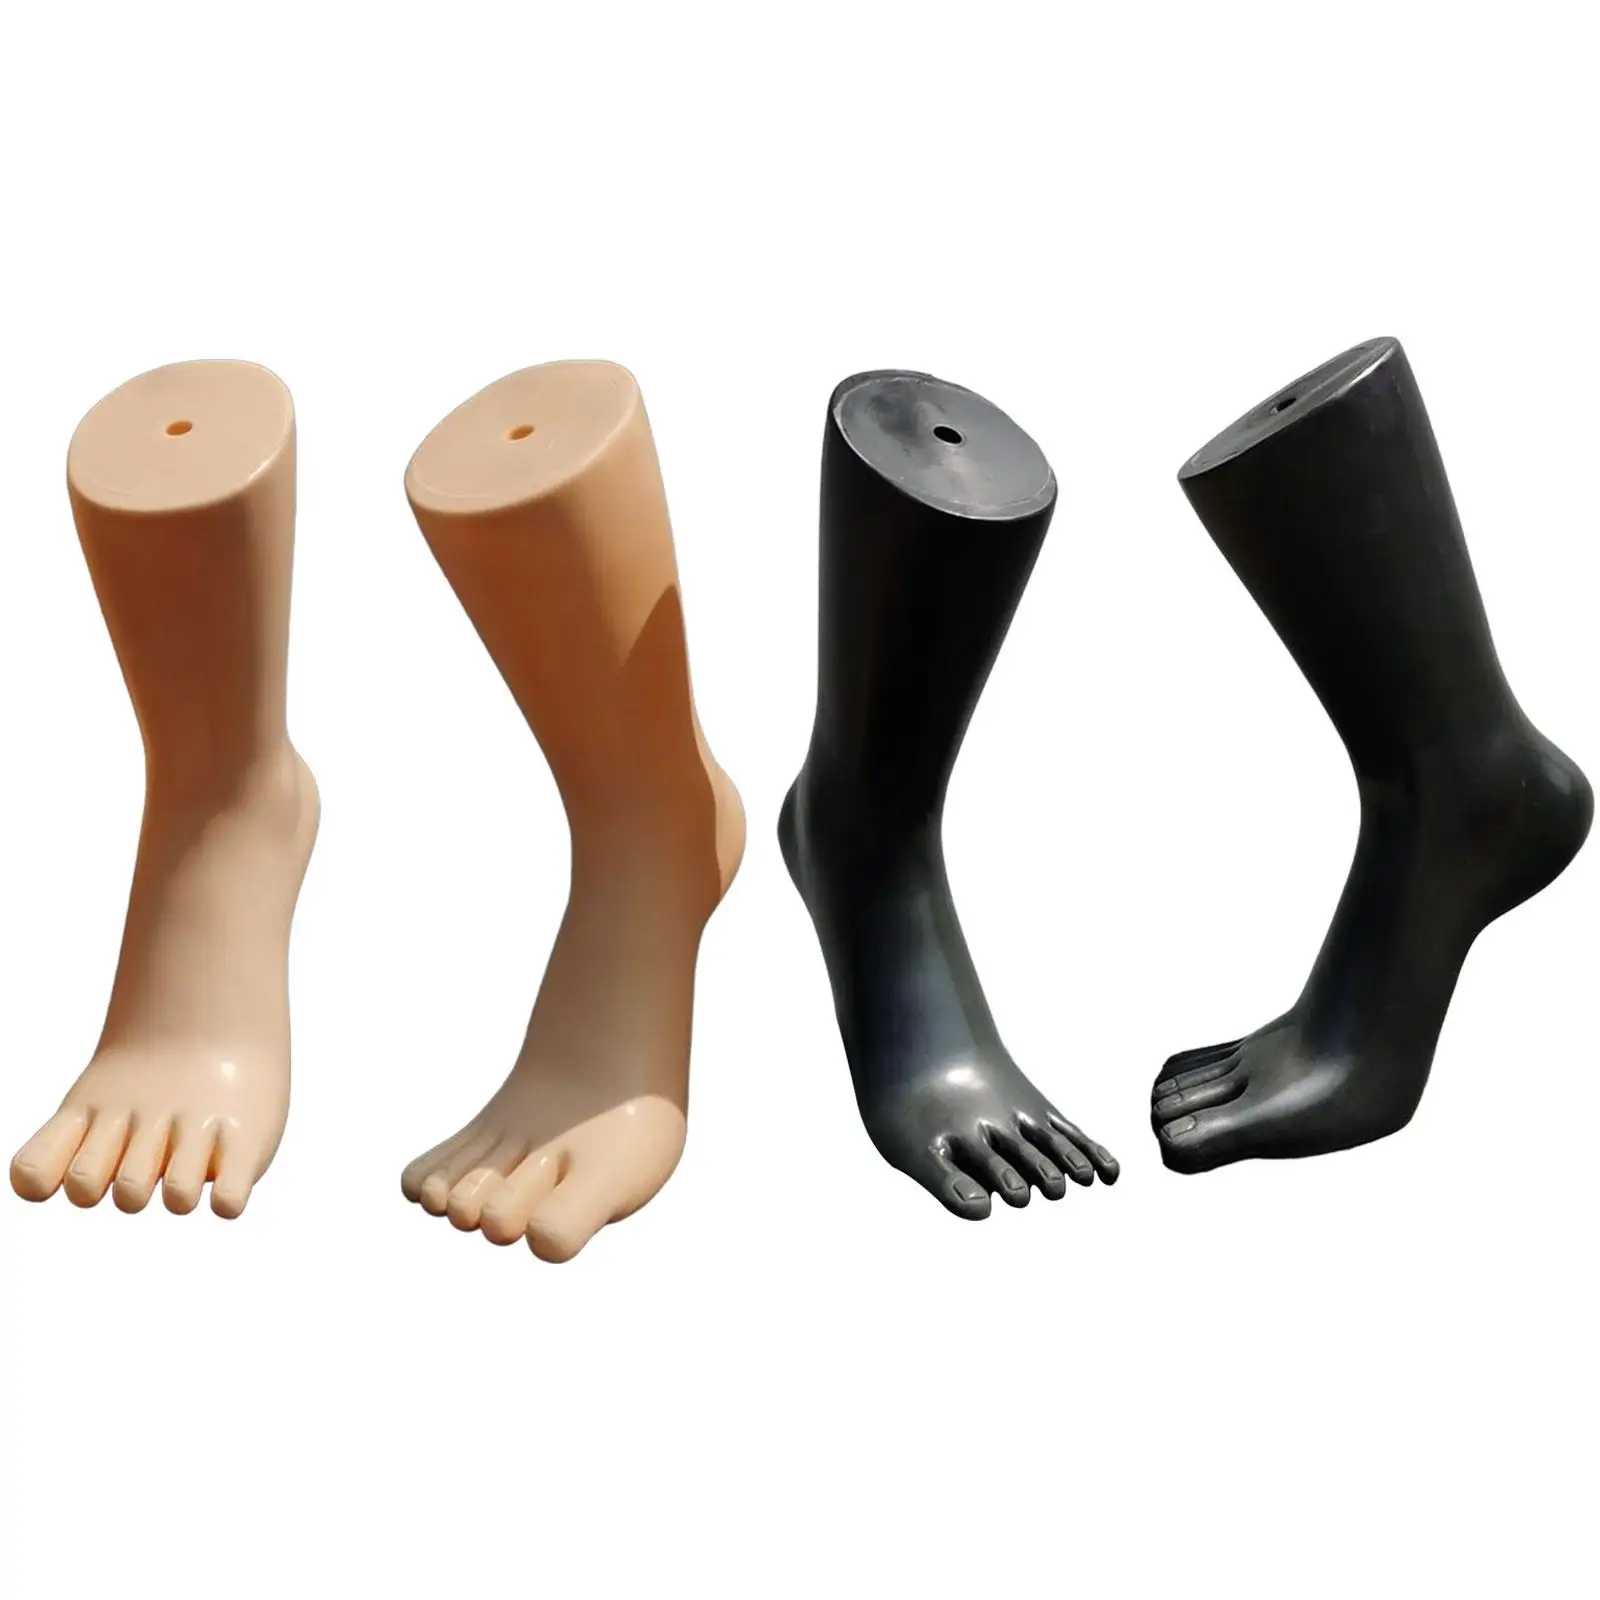 Mannequin Foot Shoes Display Props Shoes Displays Model Jewelry Display Stand Foot Model Display for Retail Shoes Ankle Bracelet